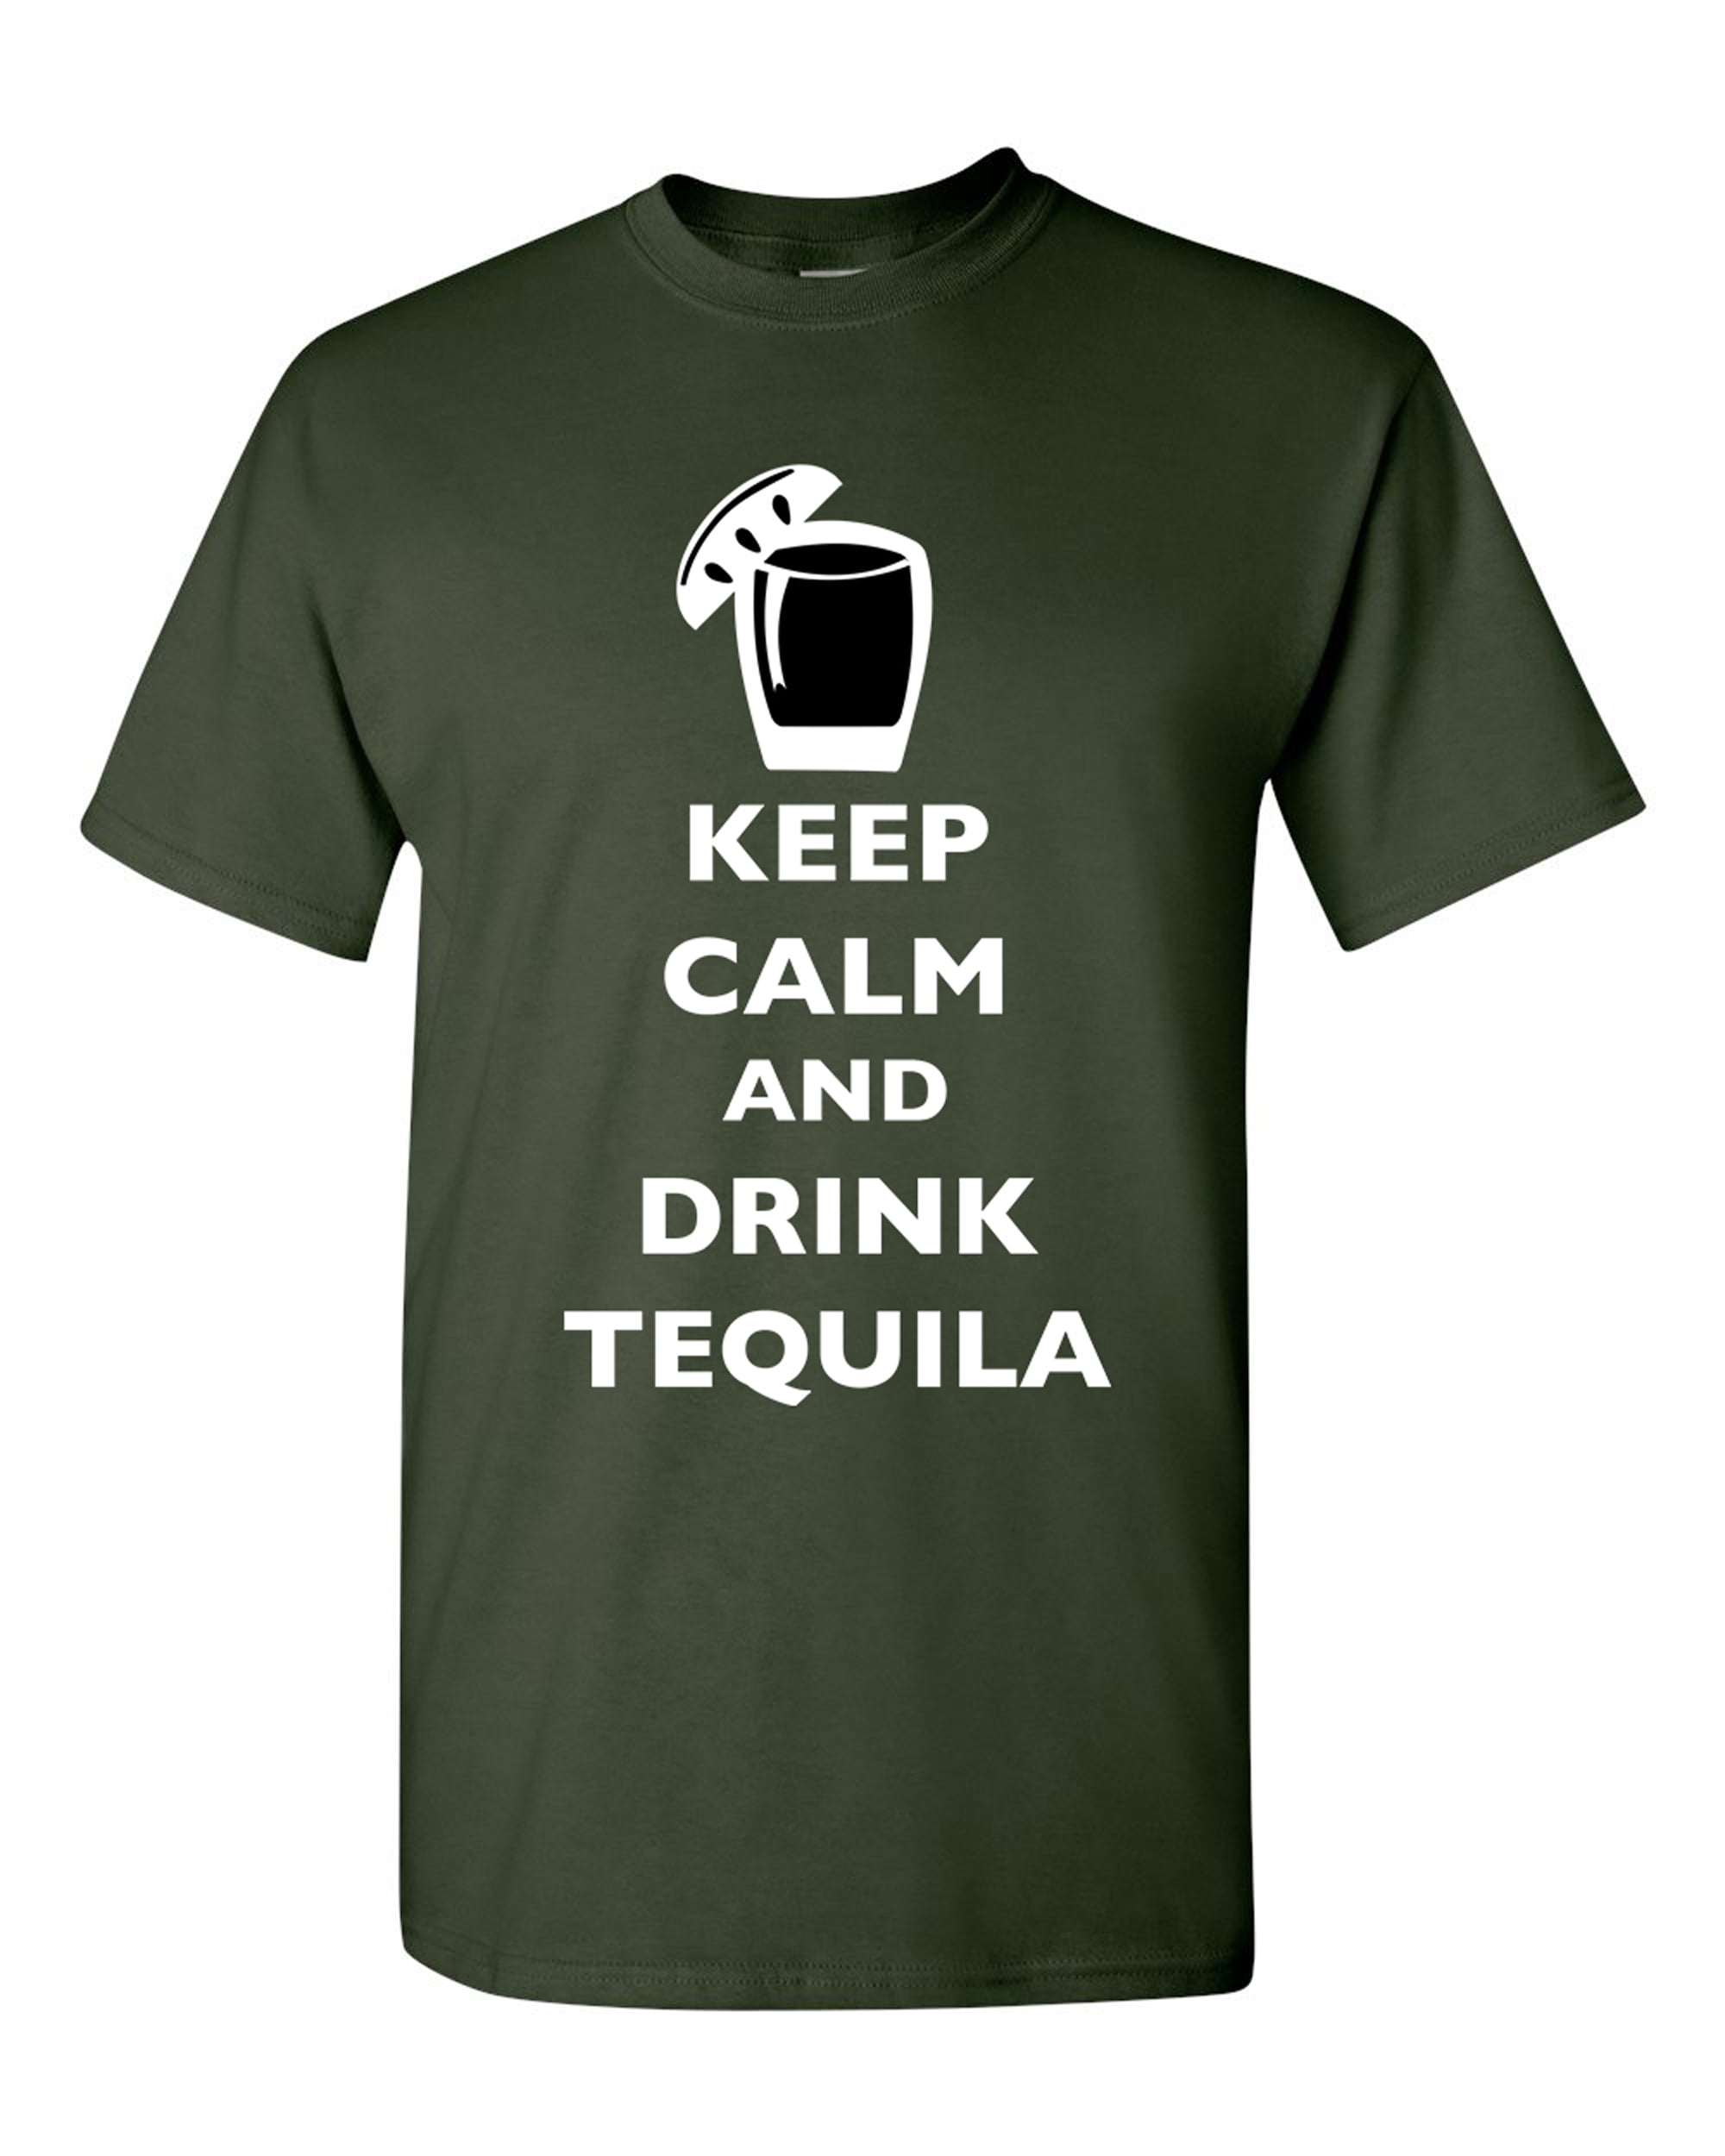 Pairs Well With Tequila shirt funny tequila shirt drinking shirt tequila margarita shirt vacation shirt alcohol shirt funny beer shirt